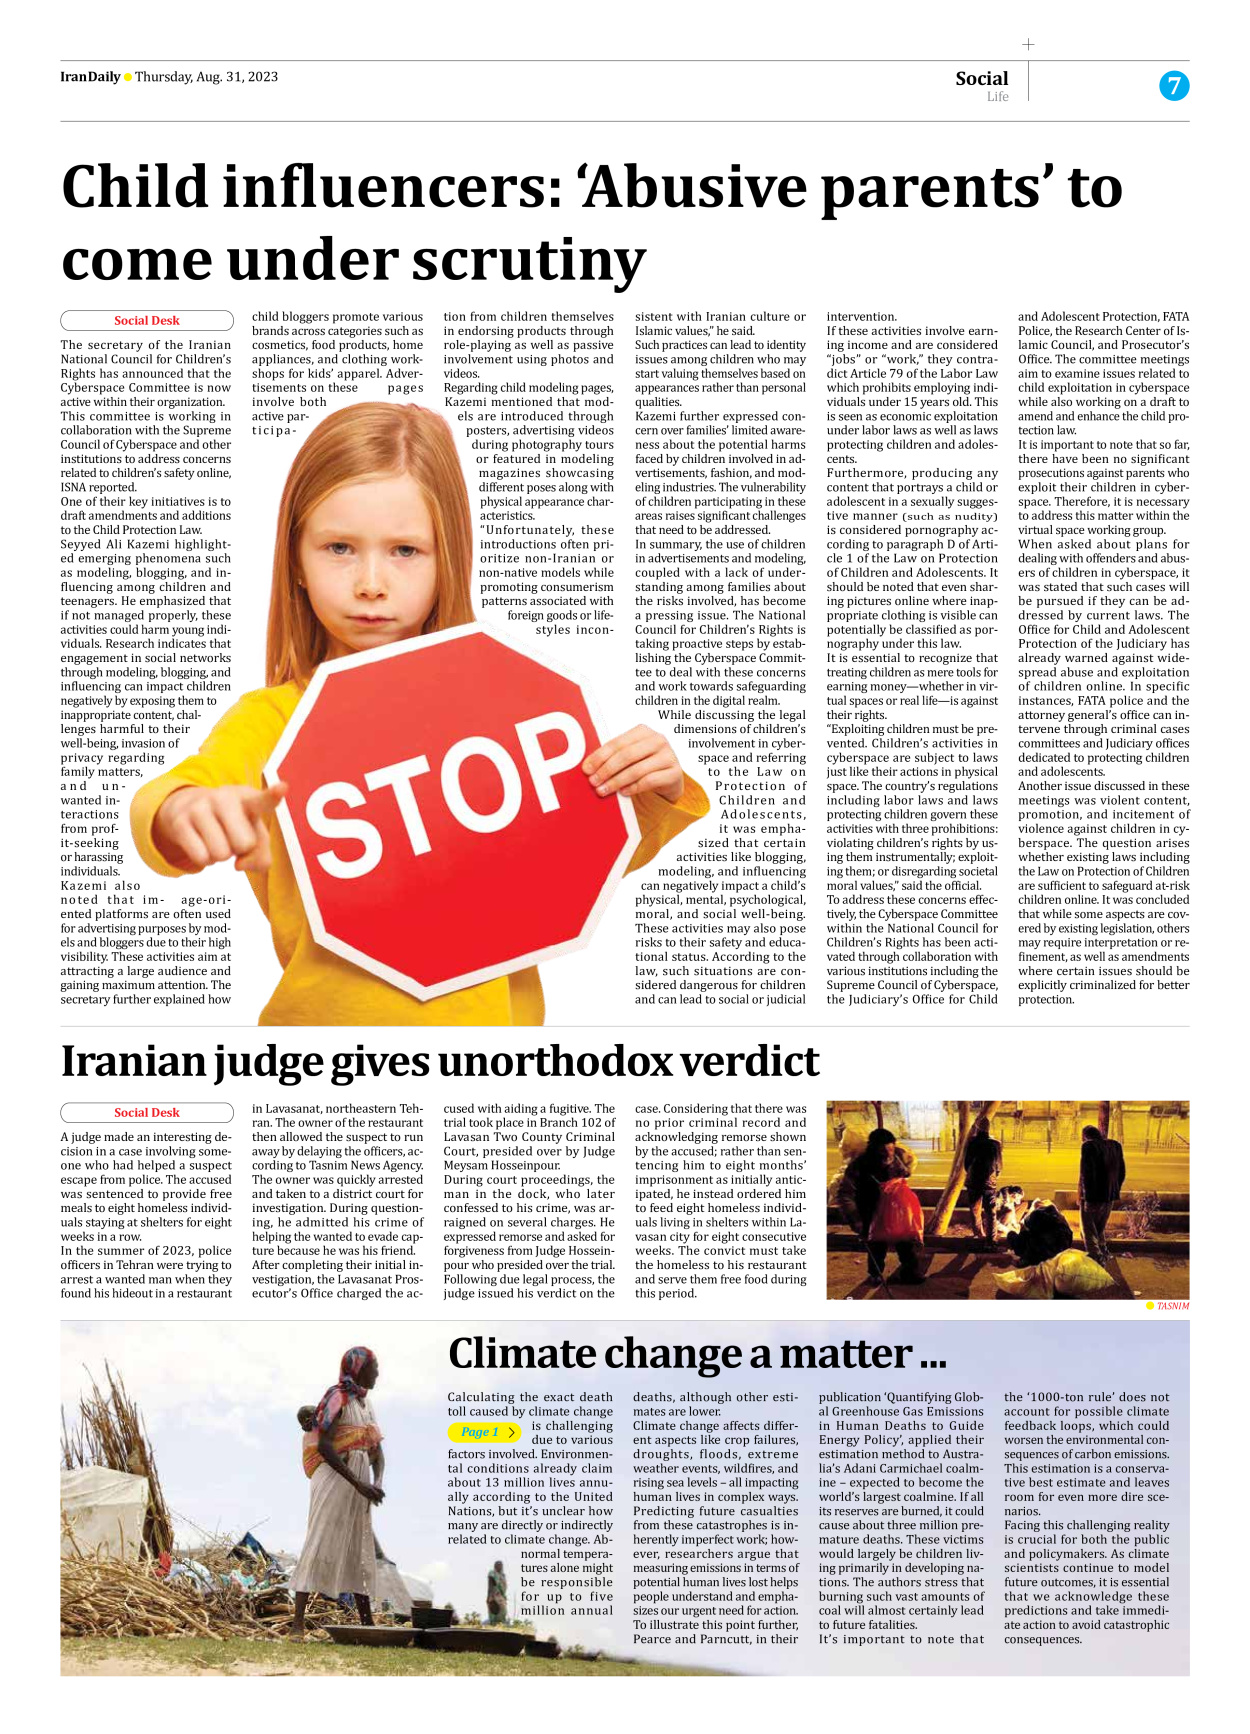 Iran Daily - Number Seven Thousand Three Hundred and Seventy Seven - 31 August 2023 - Page 7